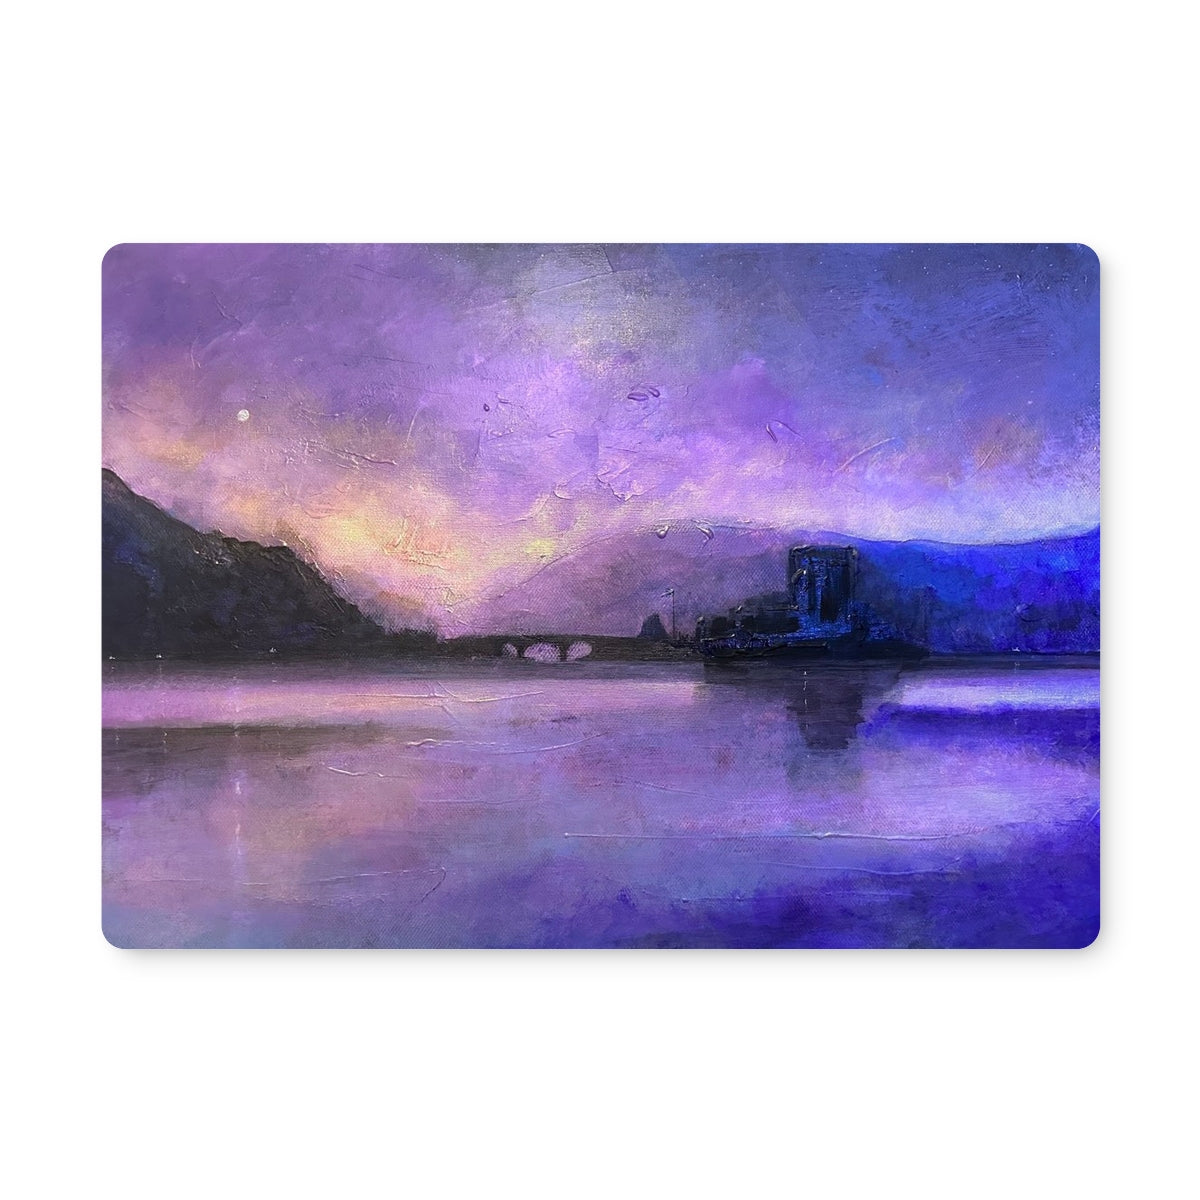 Eilean Donan Castle Moonset Art Gifts Placemat-Placemats-Historic & Iconic Scotland Art Gallery-4 Placemats-Paintings, Prints, Homeware, Art Gifts From Scotland By Scottish Artist Kevin Hunter